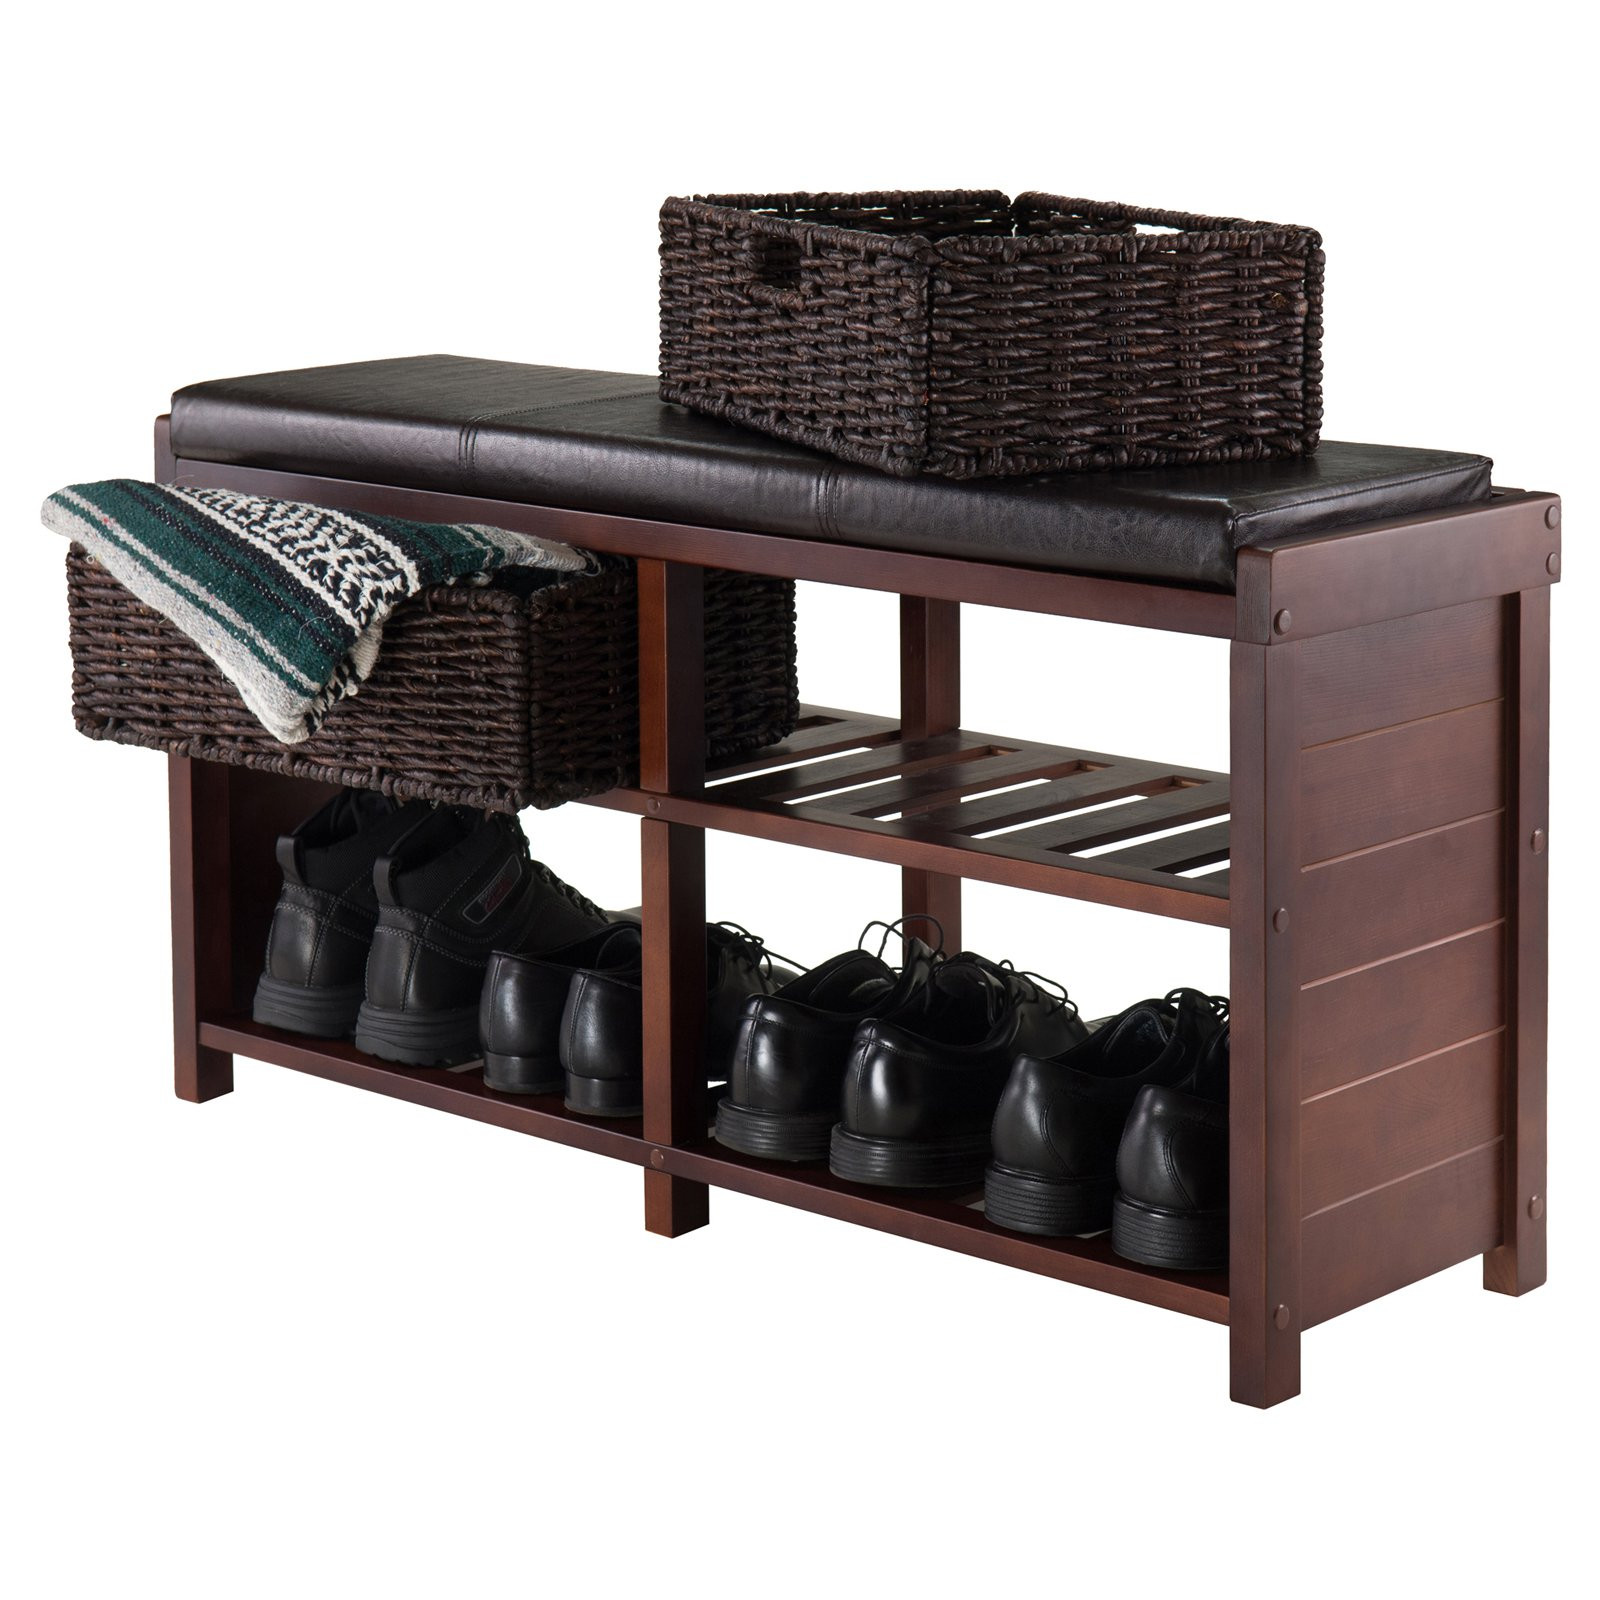 Indoor Storage Bench Cushion
 Winsome Colin Cushion Bench with Baskets Indoor Benches